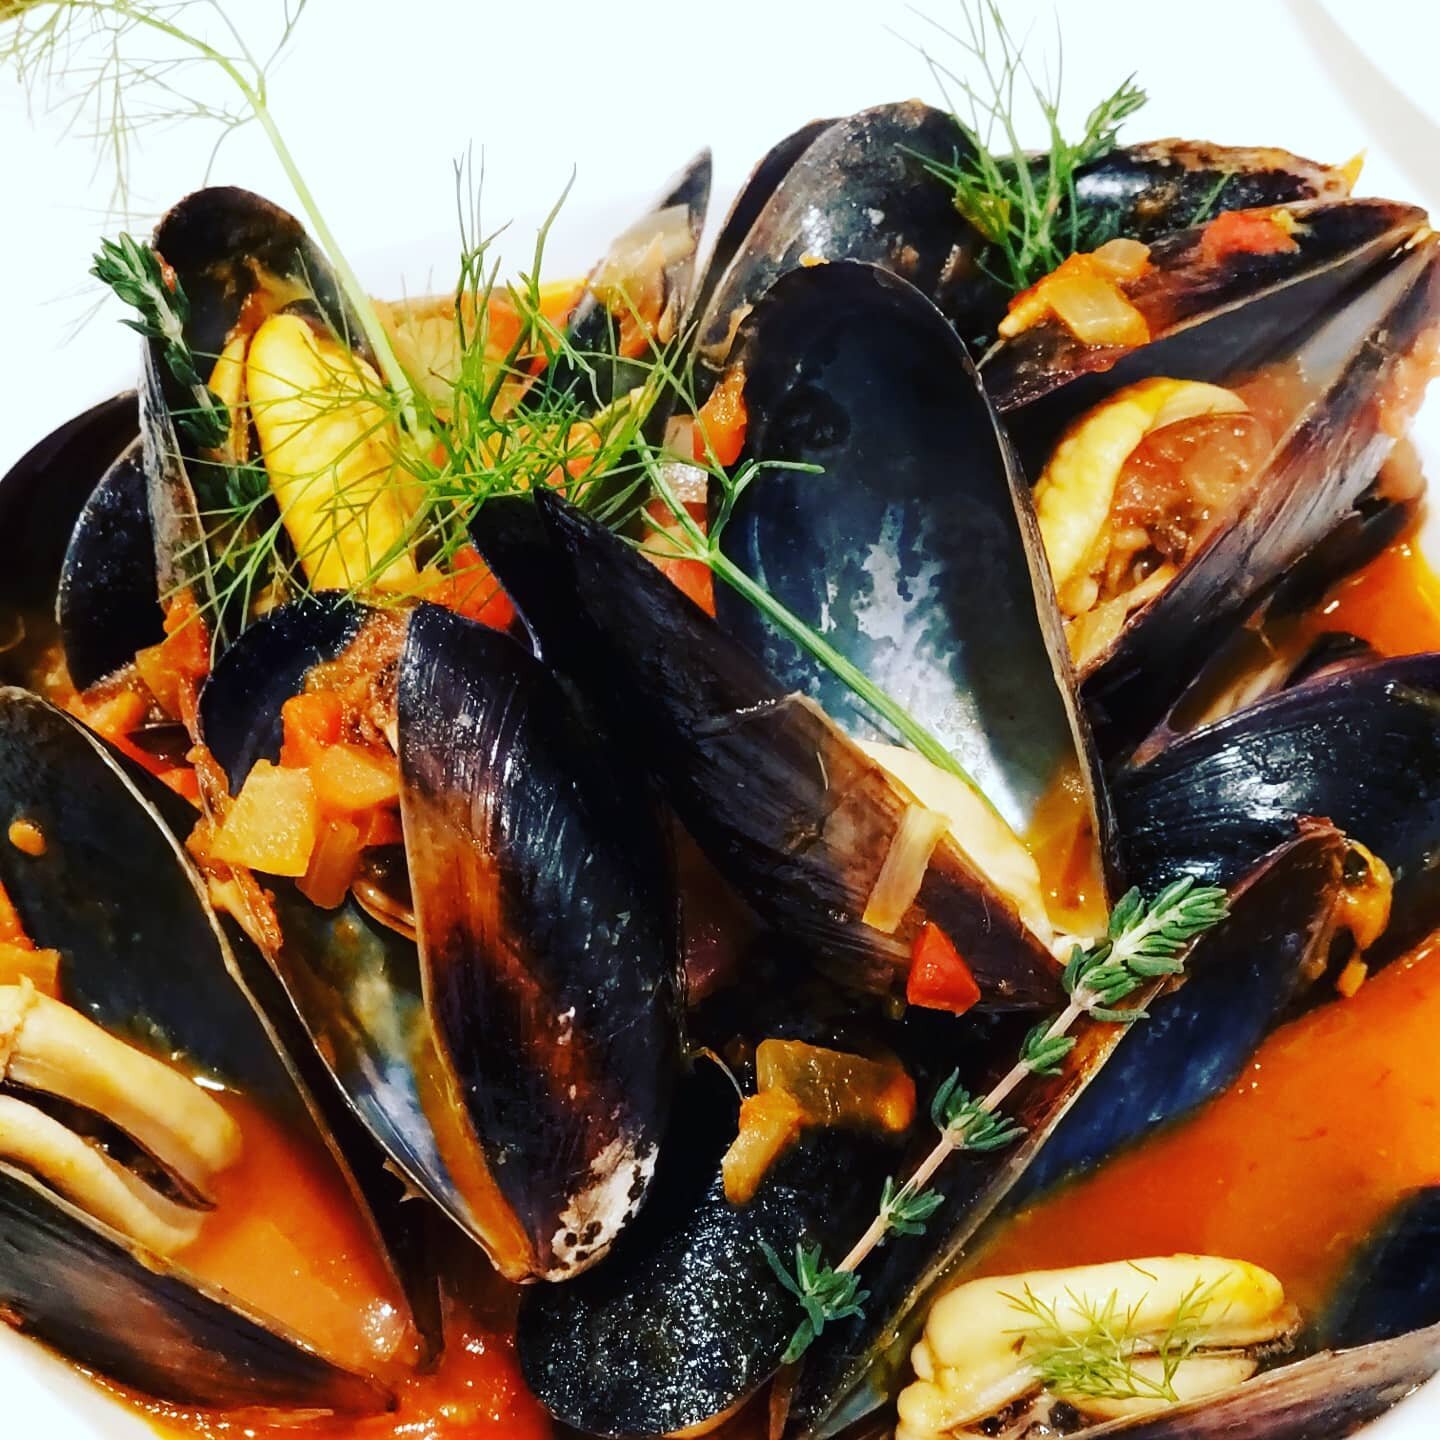 🇧🇪 Moules Frites 🇧🇪

Now available! 

This classic Belgium and French dish is incredibly delicious and a perfect accompanienment for date nights at home.

Featuring 2 pounds of cleaned mussels, a large portion of French fries with roast garlic ai